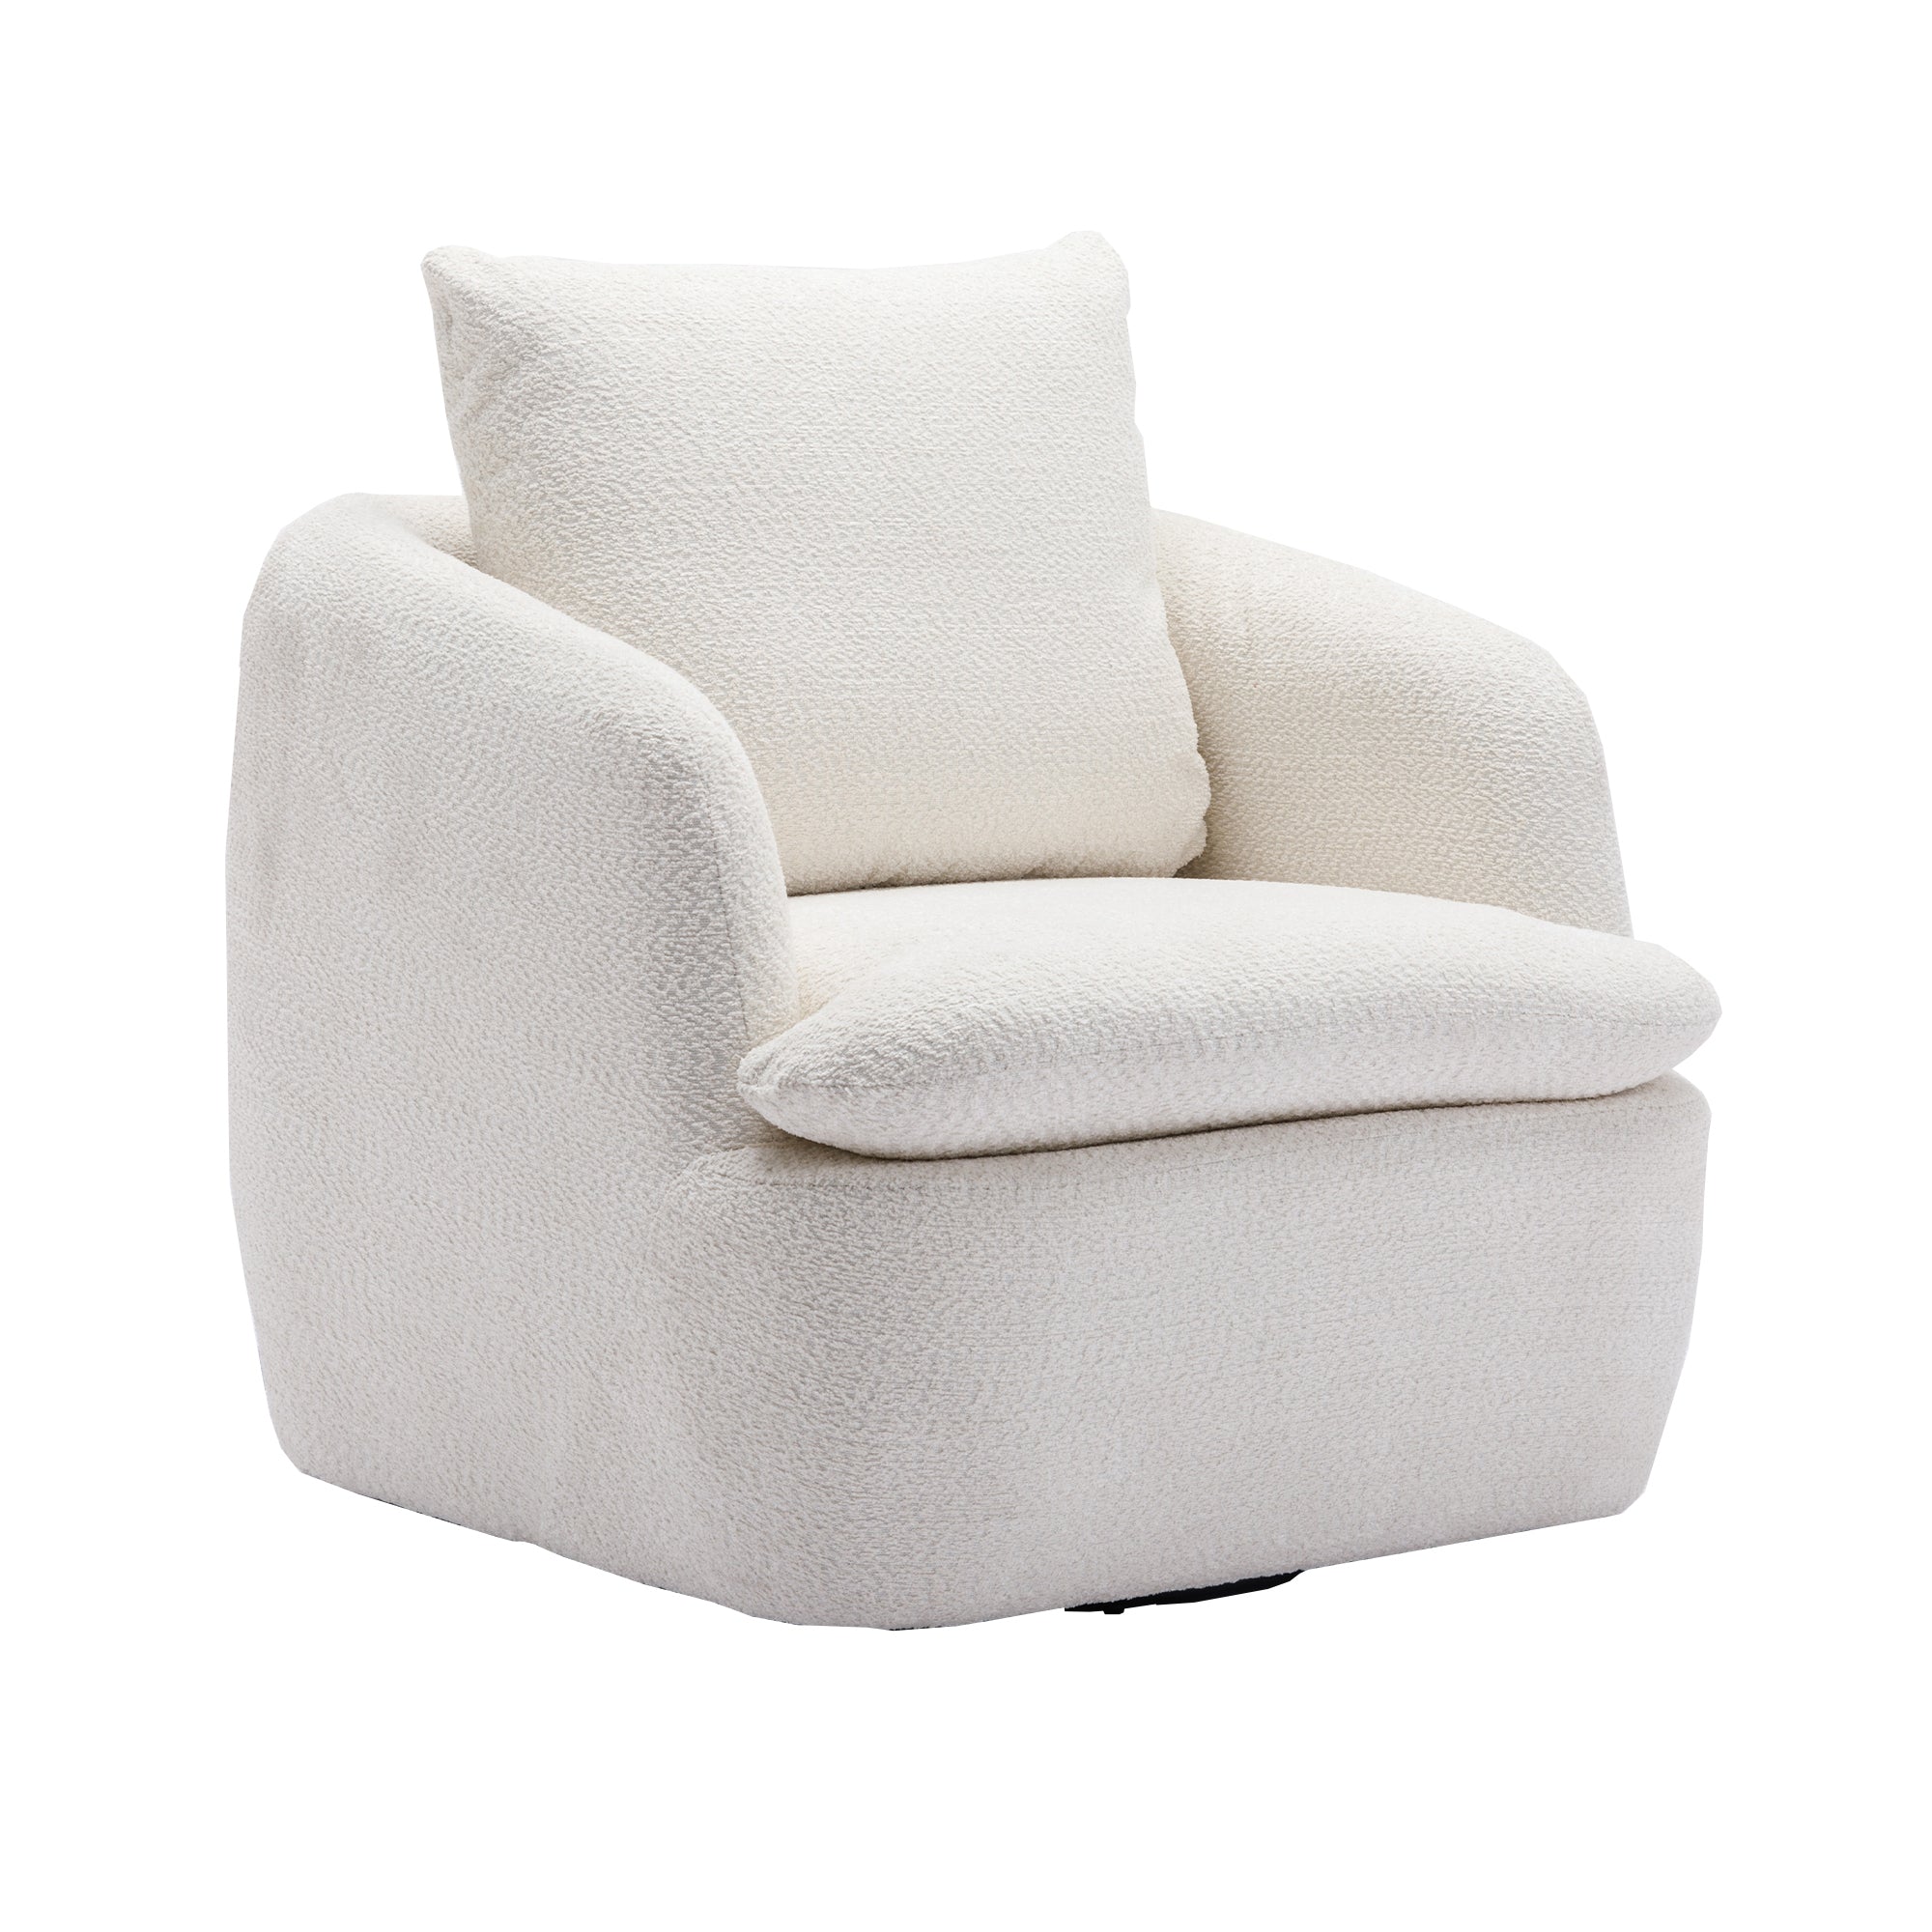 Swivel Barrel Chair, Comfy Round Accent Sofa Chair - Beige